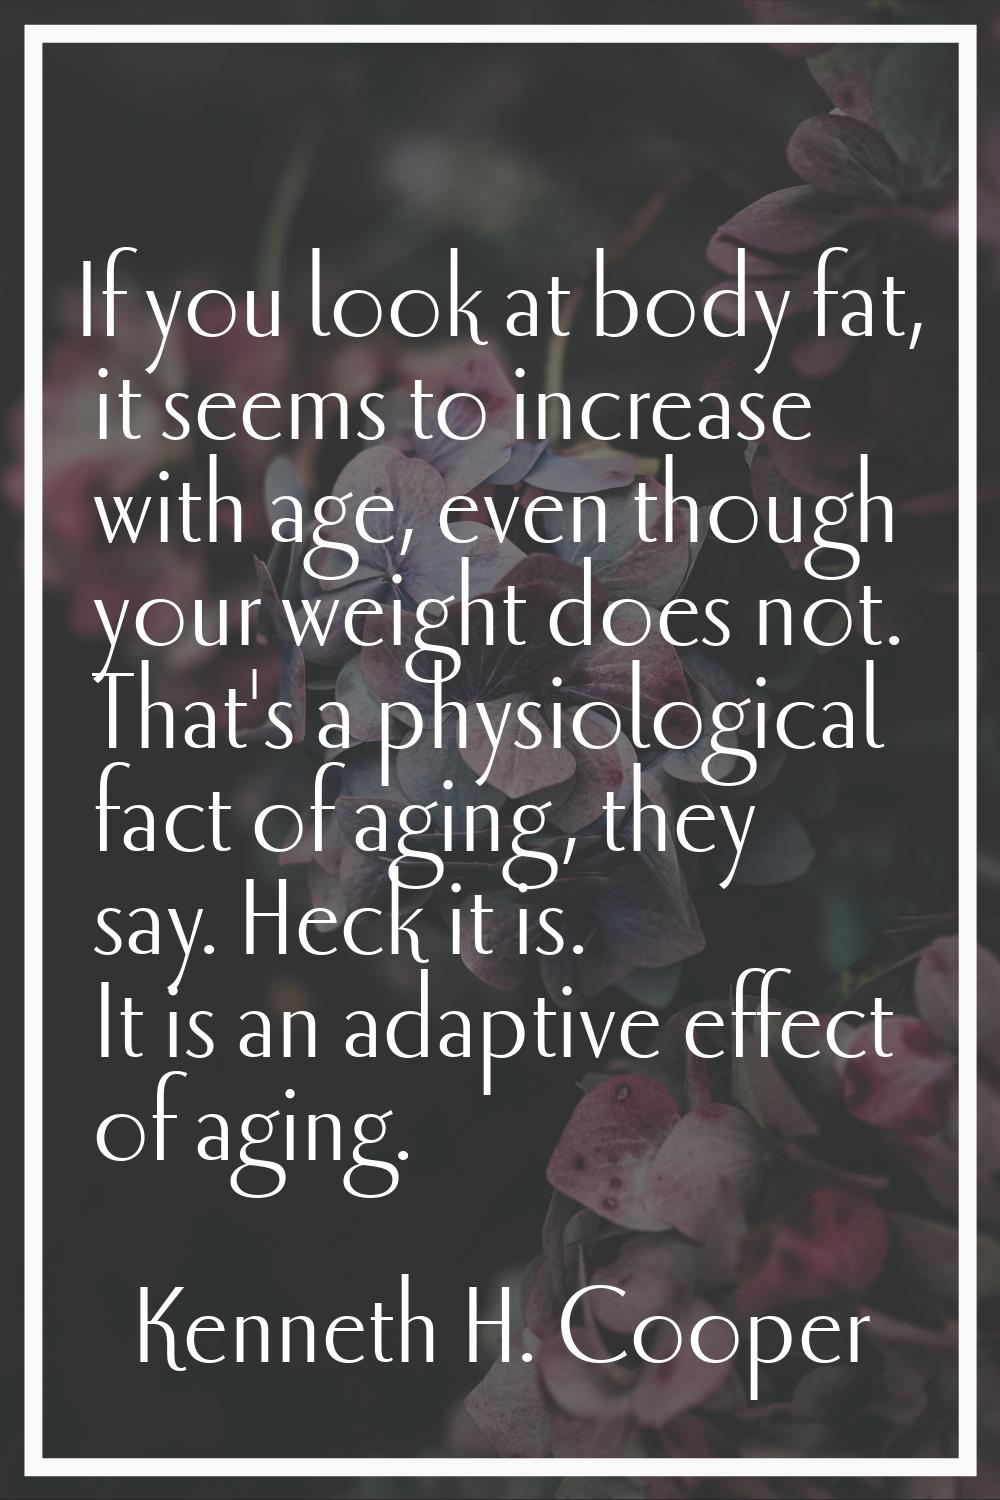 If you look at body fat, it seems to increase with age, even though your weight does not. That's a 